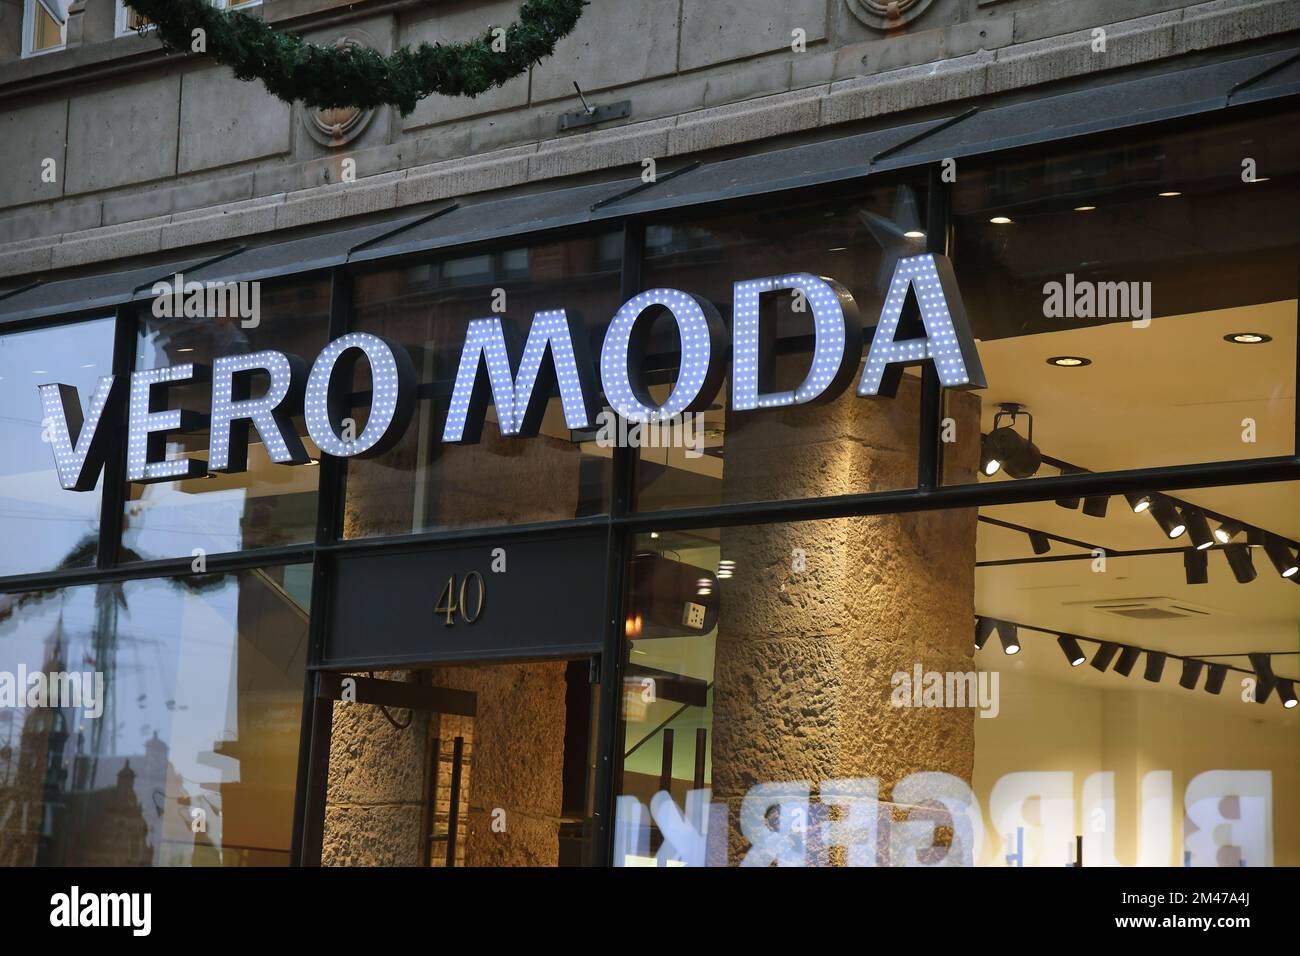 Vero moda stock photography and images - Alamy